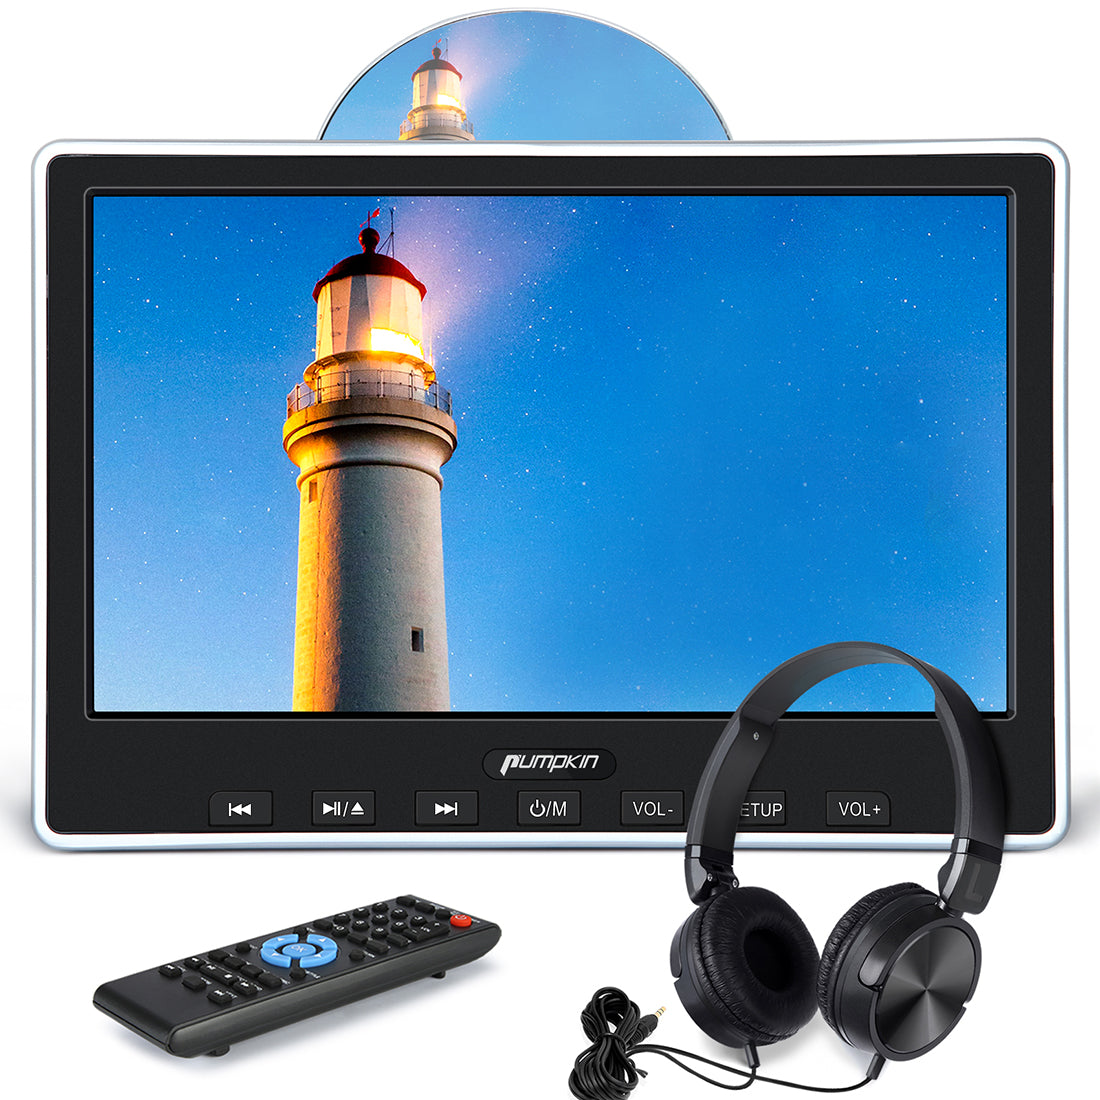 DVD Player for TV with HDMI-compatible AV-output, Home SVCD